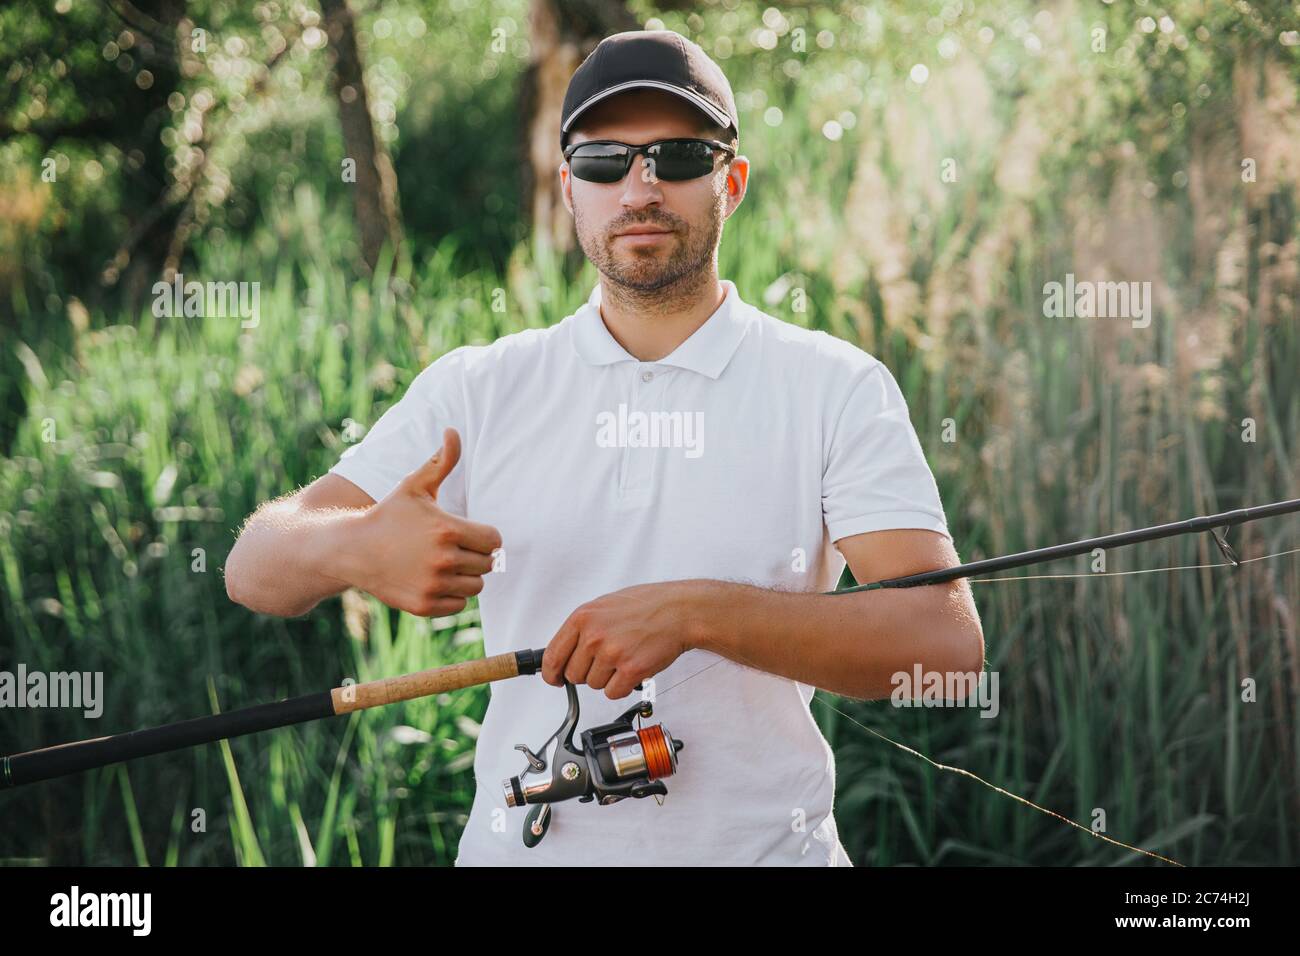 https://c8.alamy.com/comp/2C74H2J/young-fisherman-fishing-on-lake-or-river-guy-stand-alone-and-hold-big-thumb-up-carry-long-rod-with-some-reel-underneath-posing-on-camera-before-cat-2C74H2J.jpg